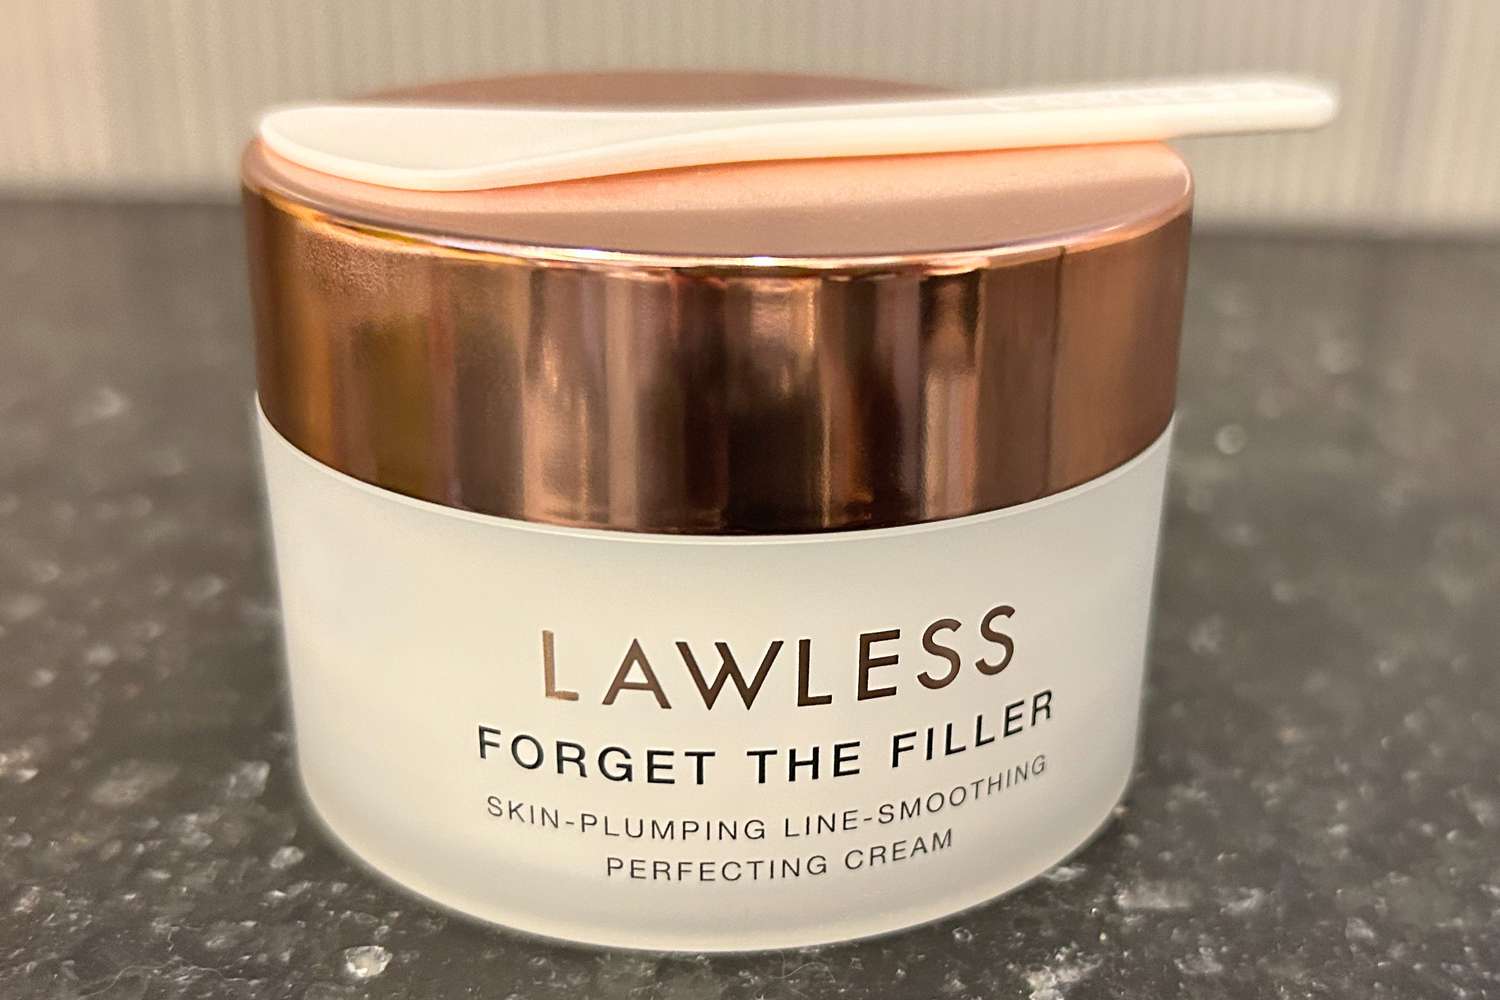 A jar of Lawless Forget the Filler Skin-Plumping Line-Smoothing Perfecting Cream with an applicator spoon